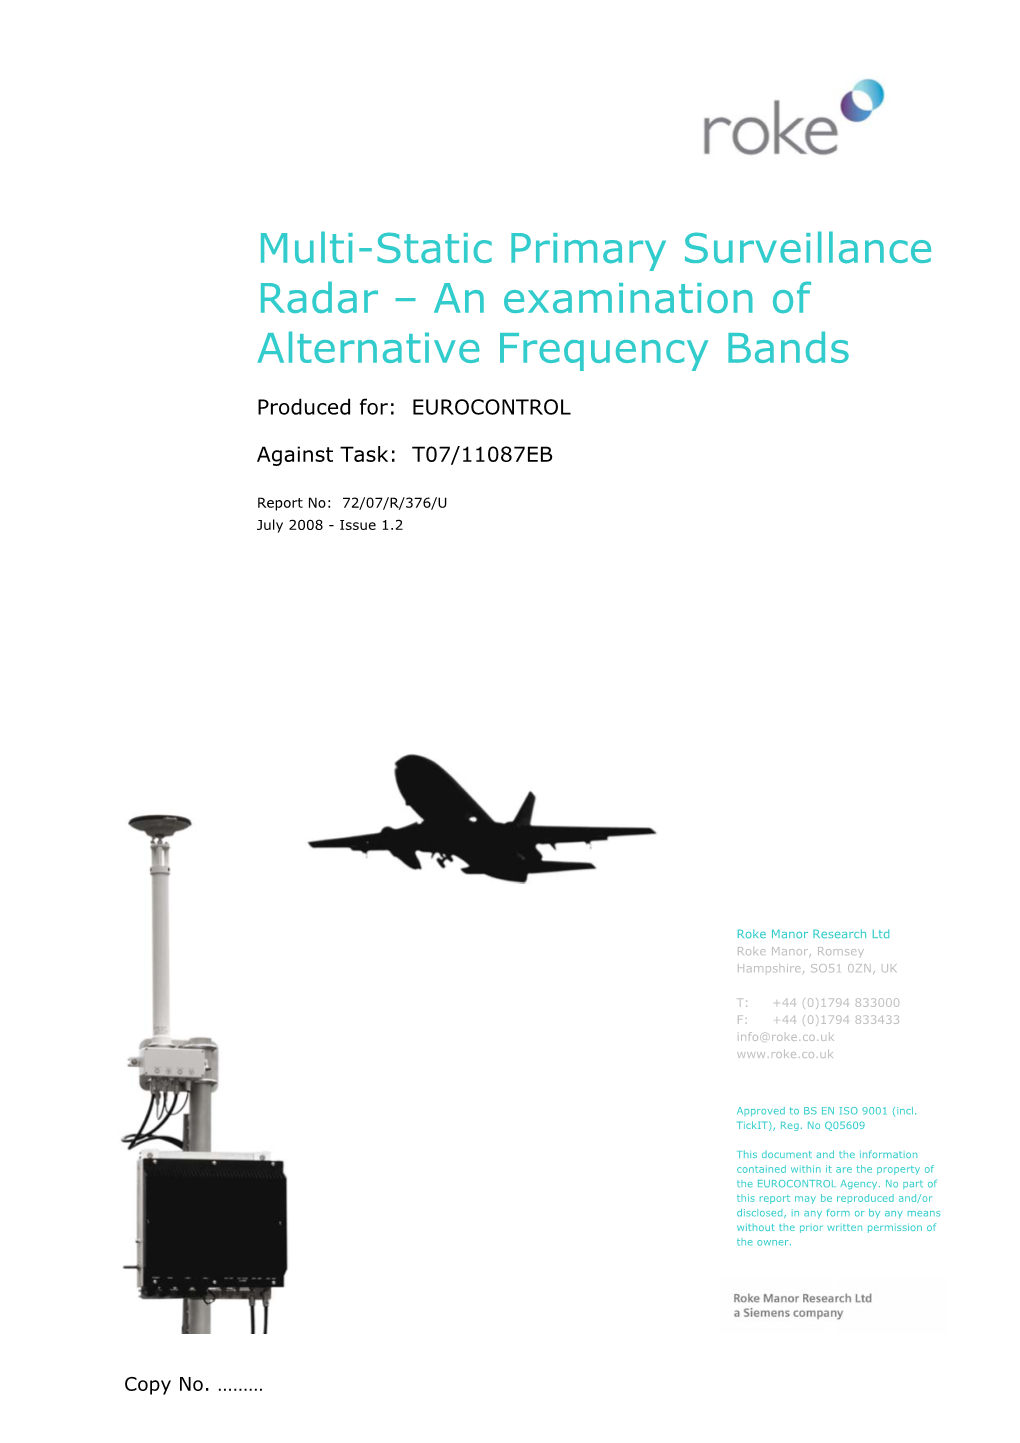 Multi-Static Primary Surveillance Radar – an Examination of Alternative Frequency Bands